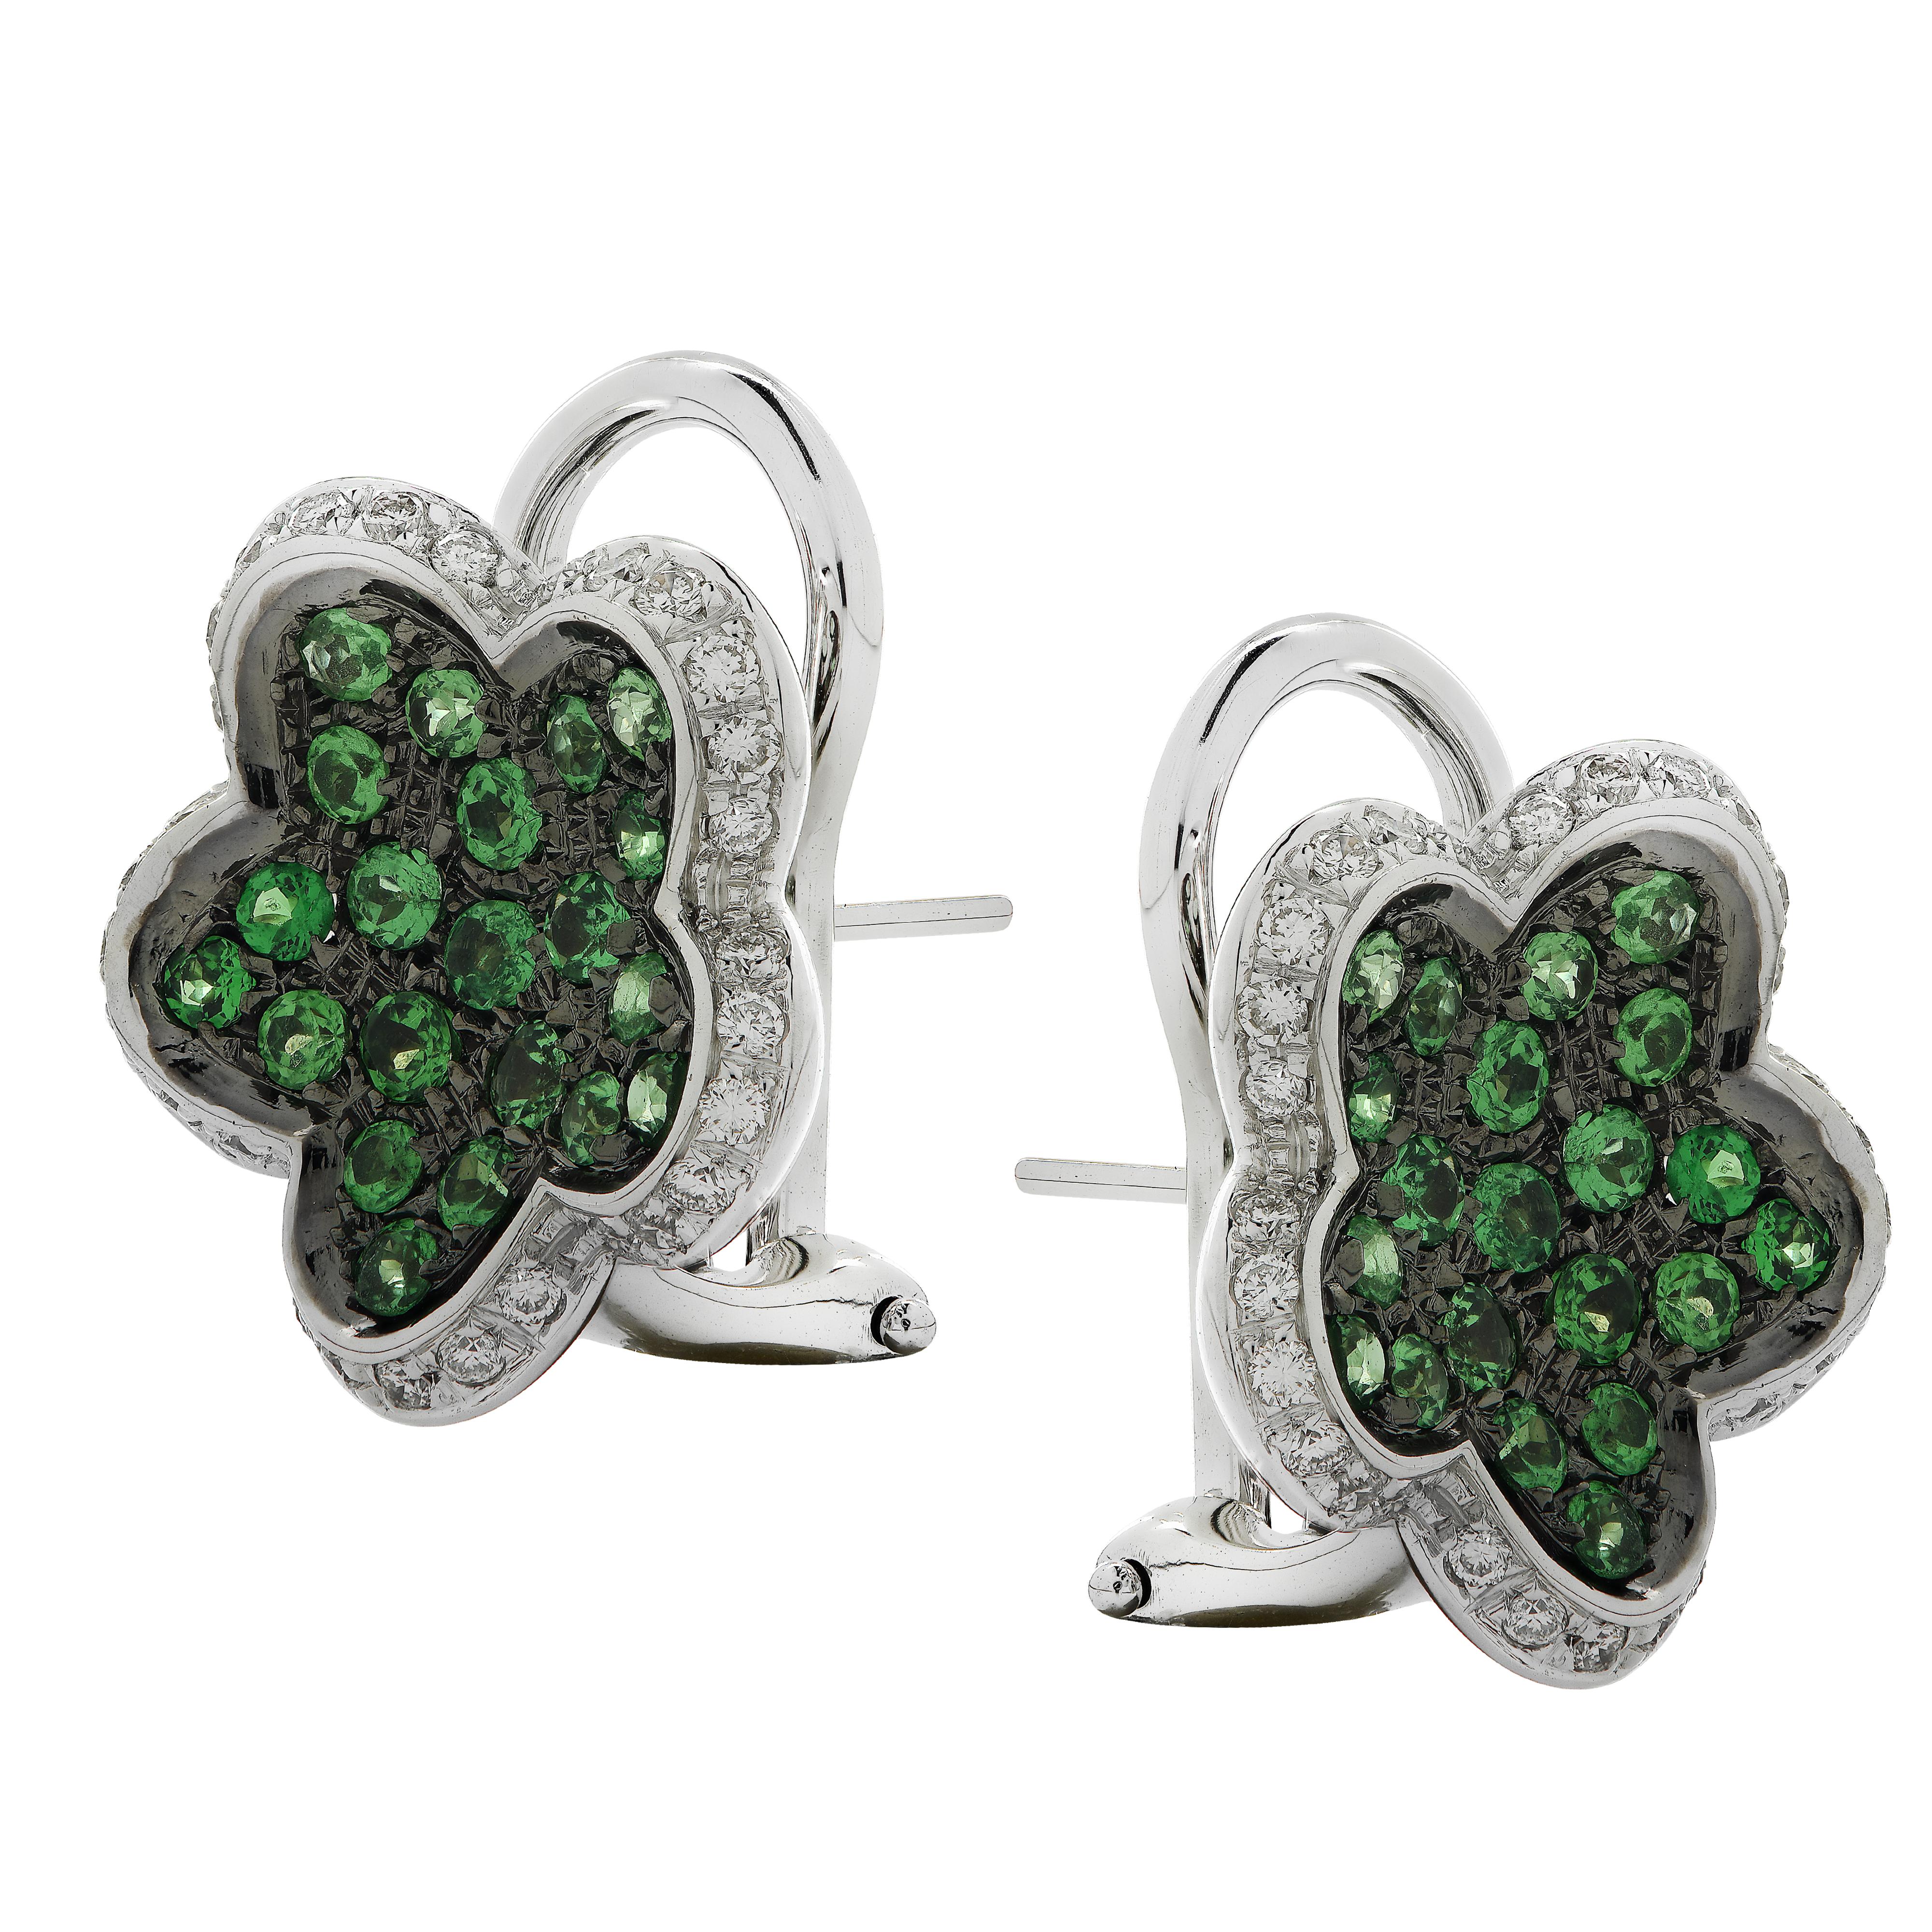 Delightful earrings crafted in Italy in 18 karat white gold with black rhodium, featuring 42 round Tsavorite Garnet weighing approximately 1.26 carats total and 60 round brilliant cut diamonds weighing approximately .6 carats total, G color, VS